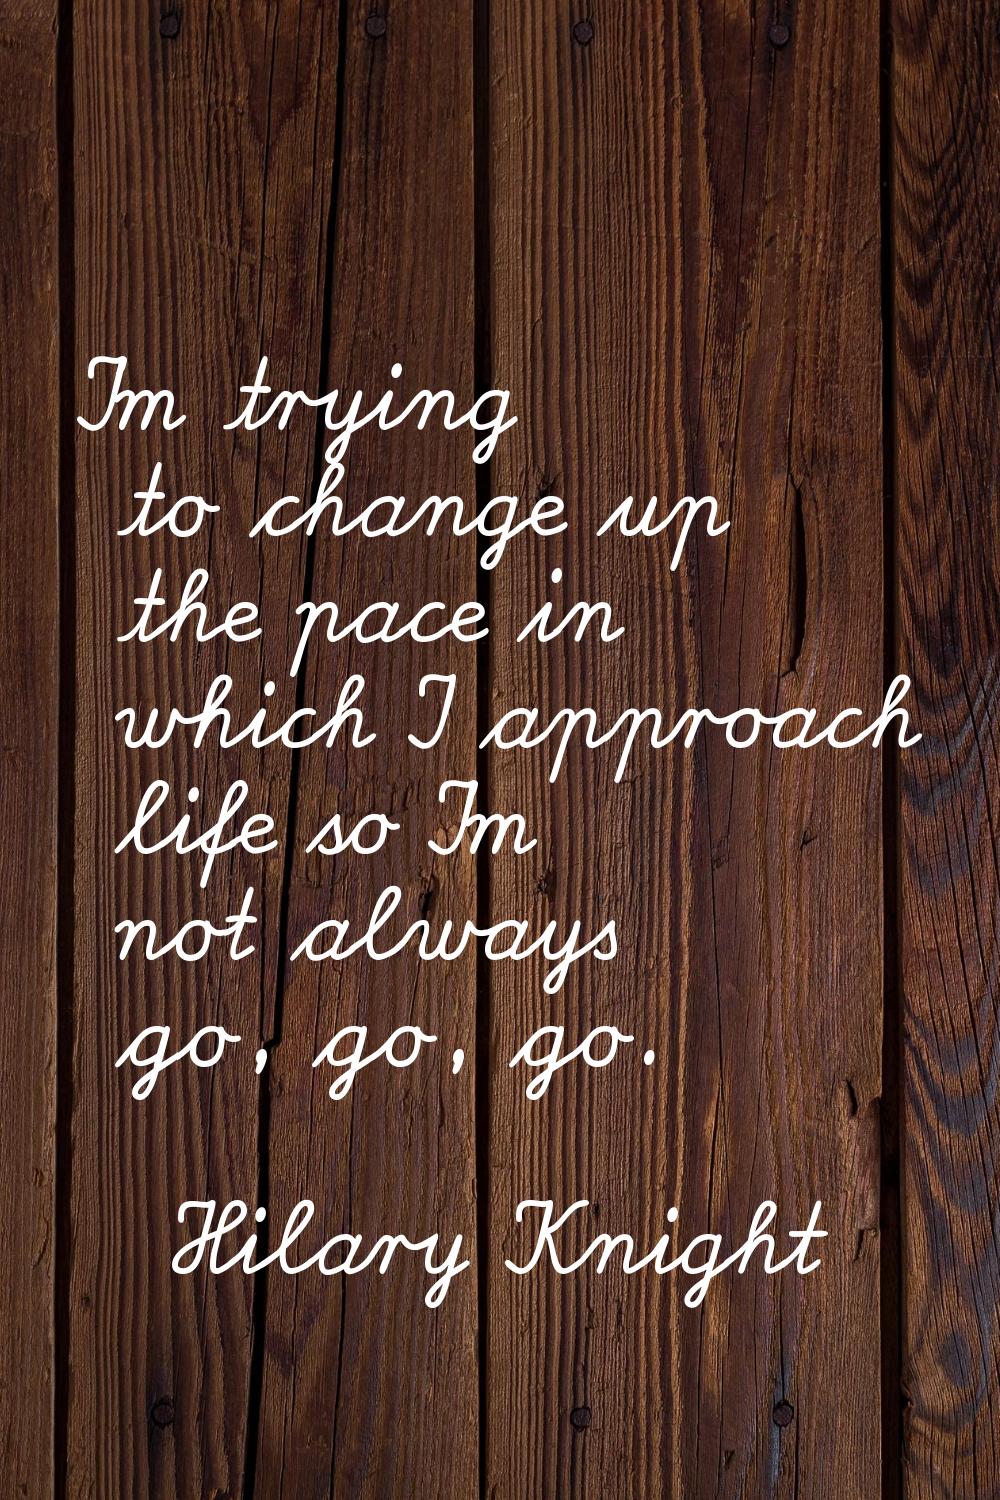 I'm trying to change up the pace in which I approach life so I'm not always go, go, go.